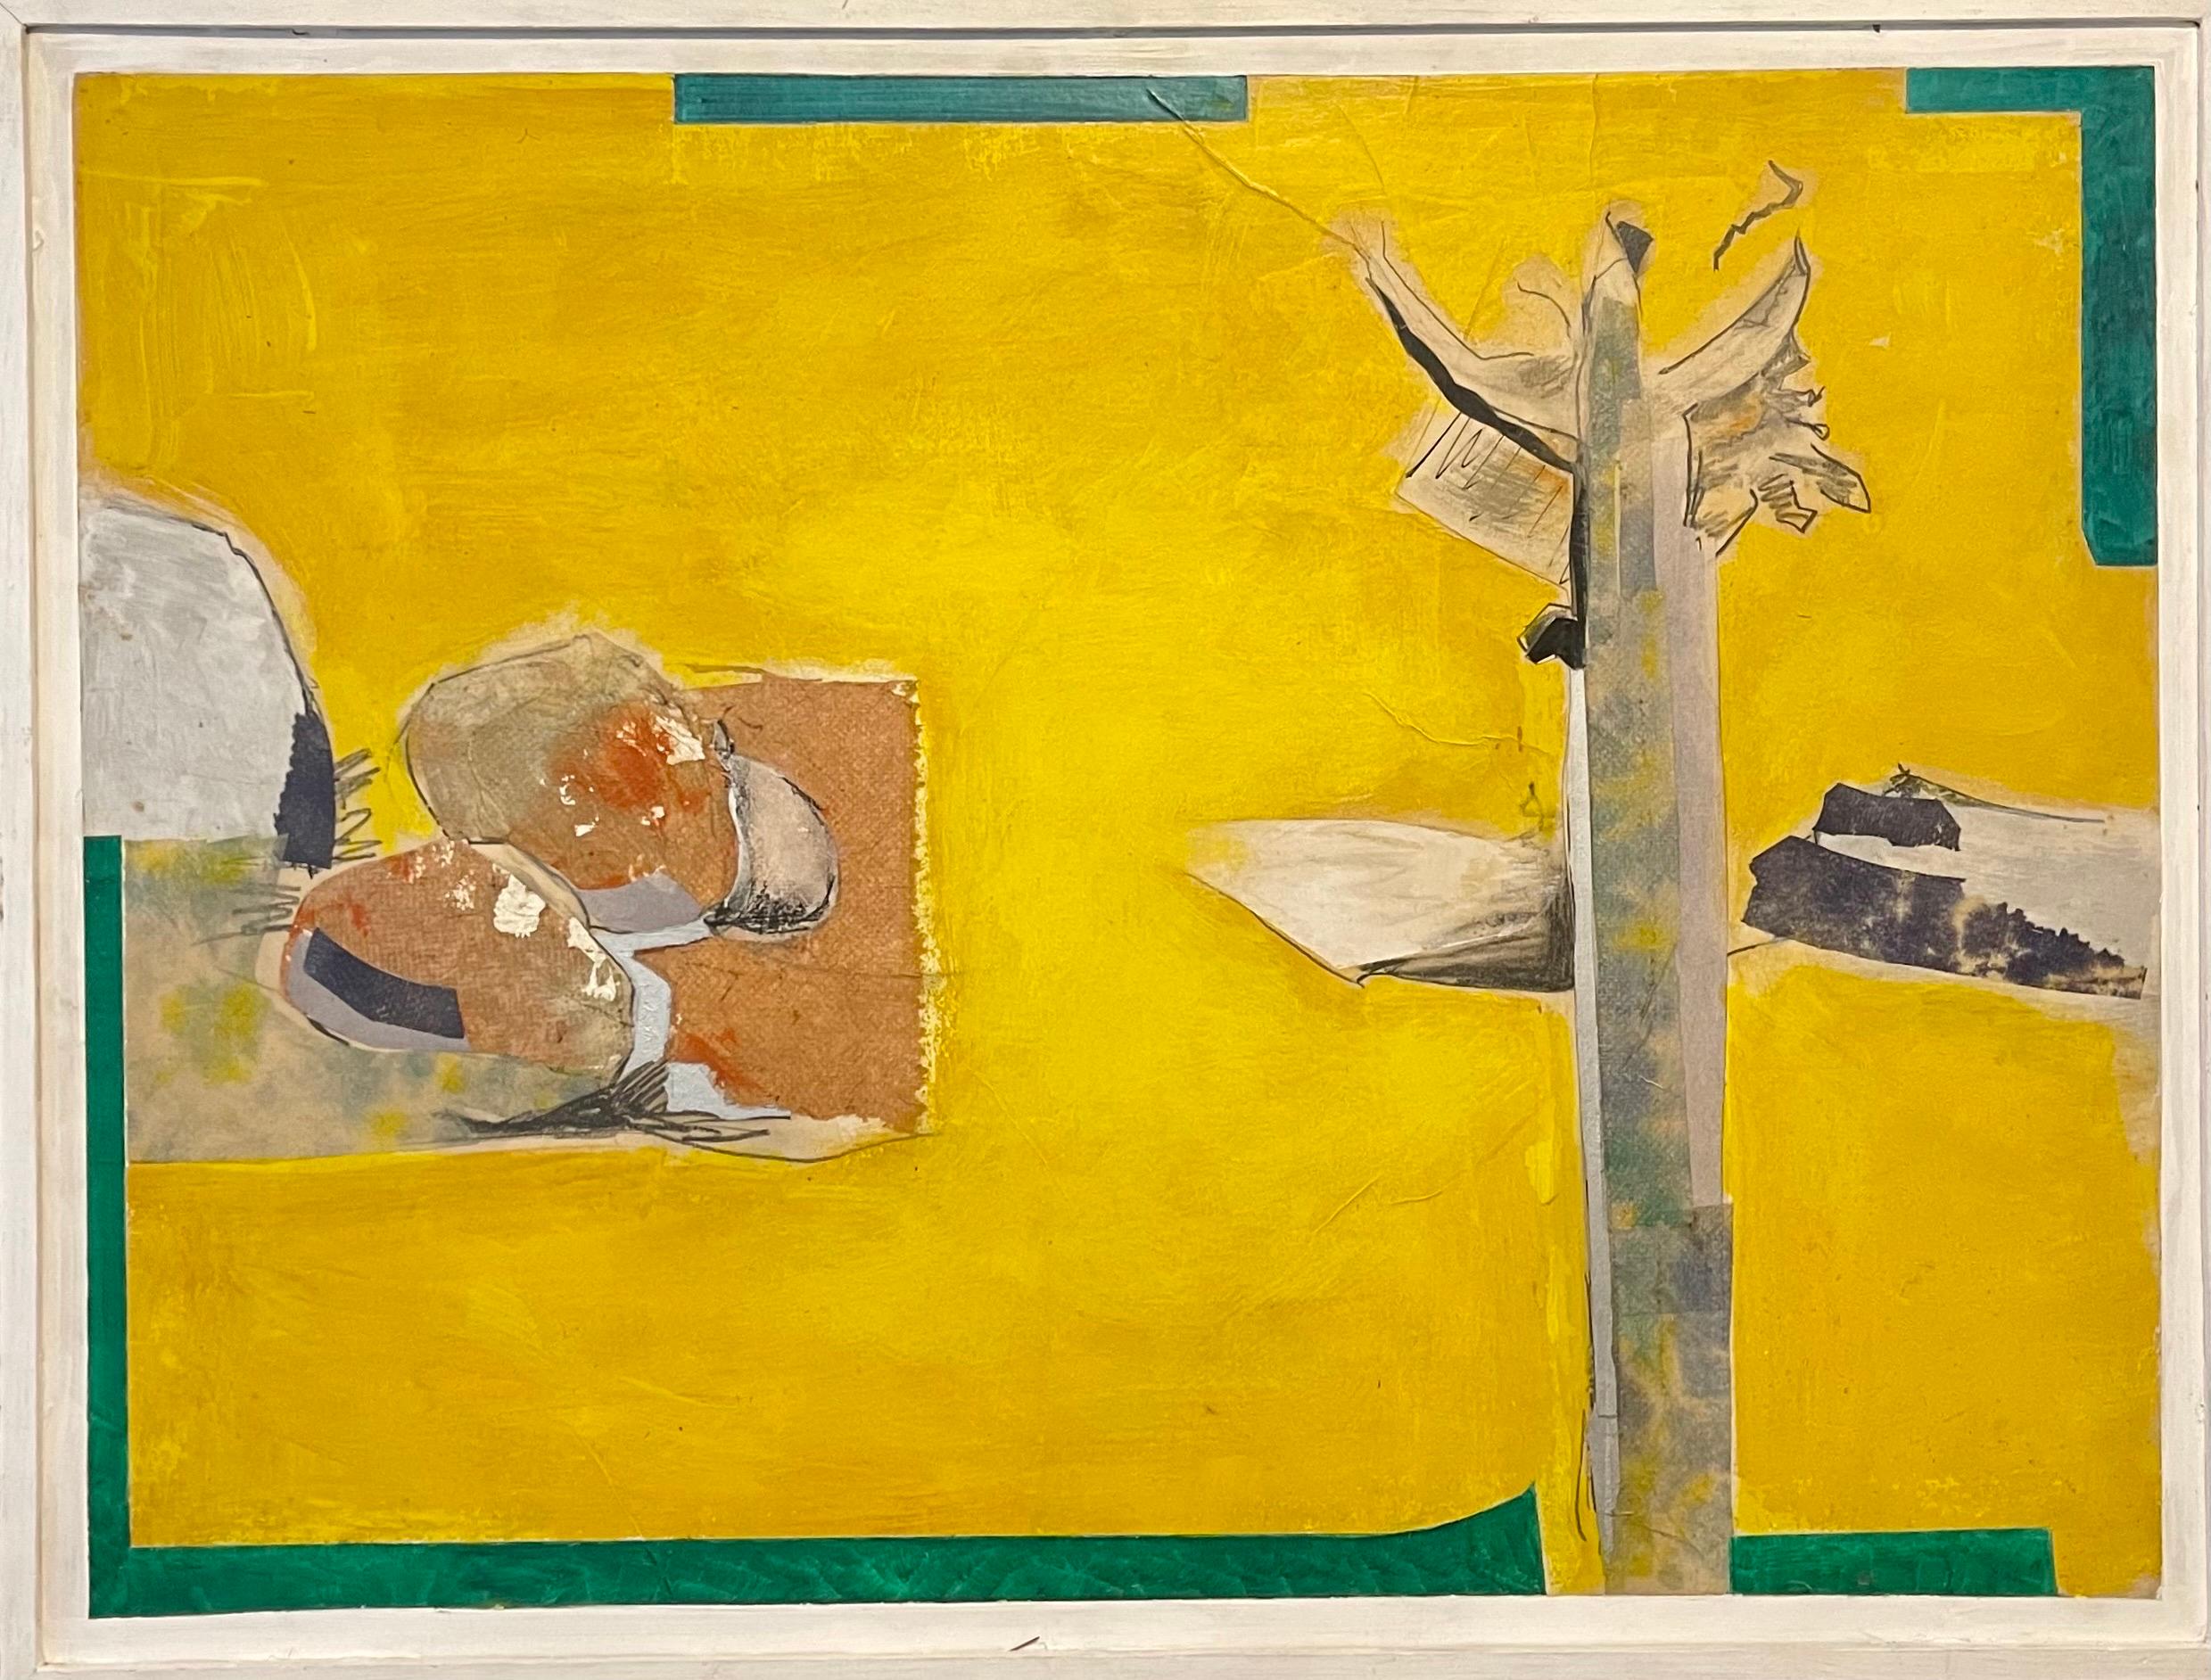 David Hare
Summer Land, 1970
Acrylic or oil paint and collage on board
Dimensions: 26  X 36 inches. Framed measuring 29 x 38 inches.
Hand signed, dated and titled on tape to verso 'Summer Land 1970 Hare'.
Provenance: Hamilton Gallery of Contemporary